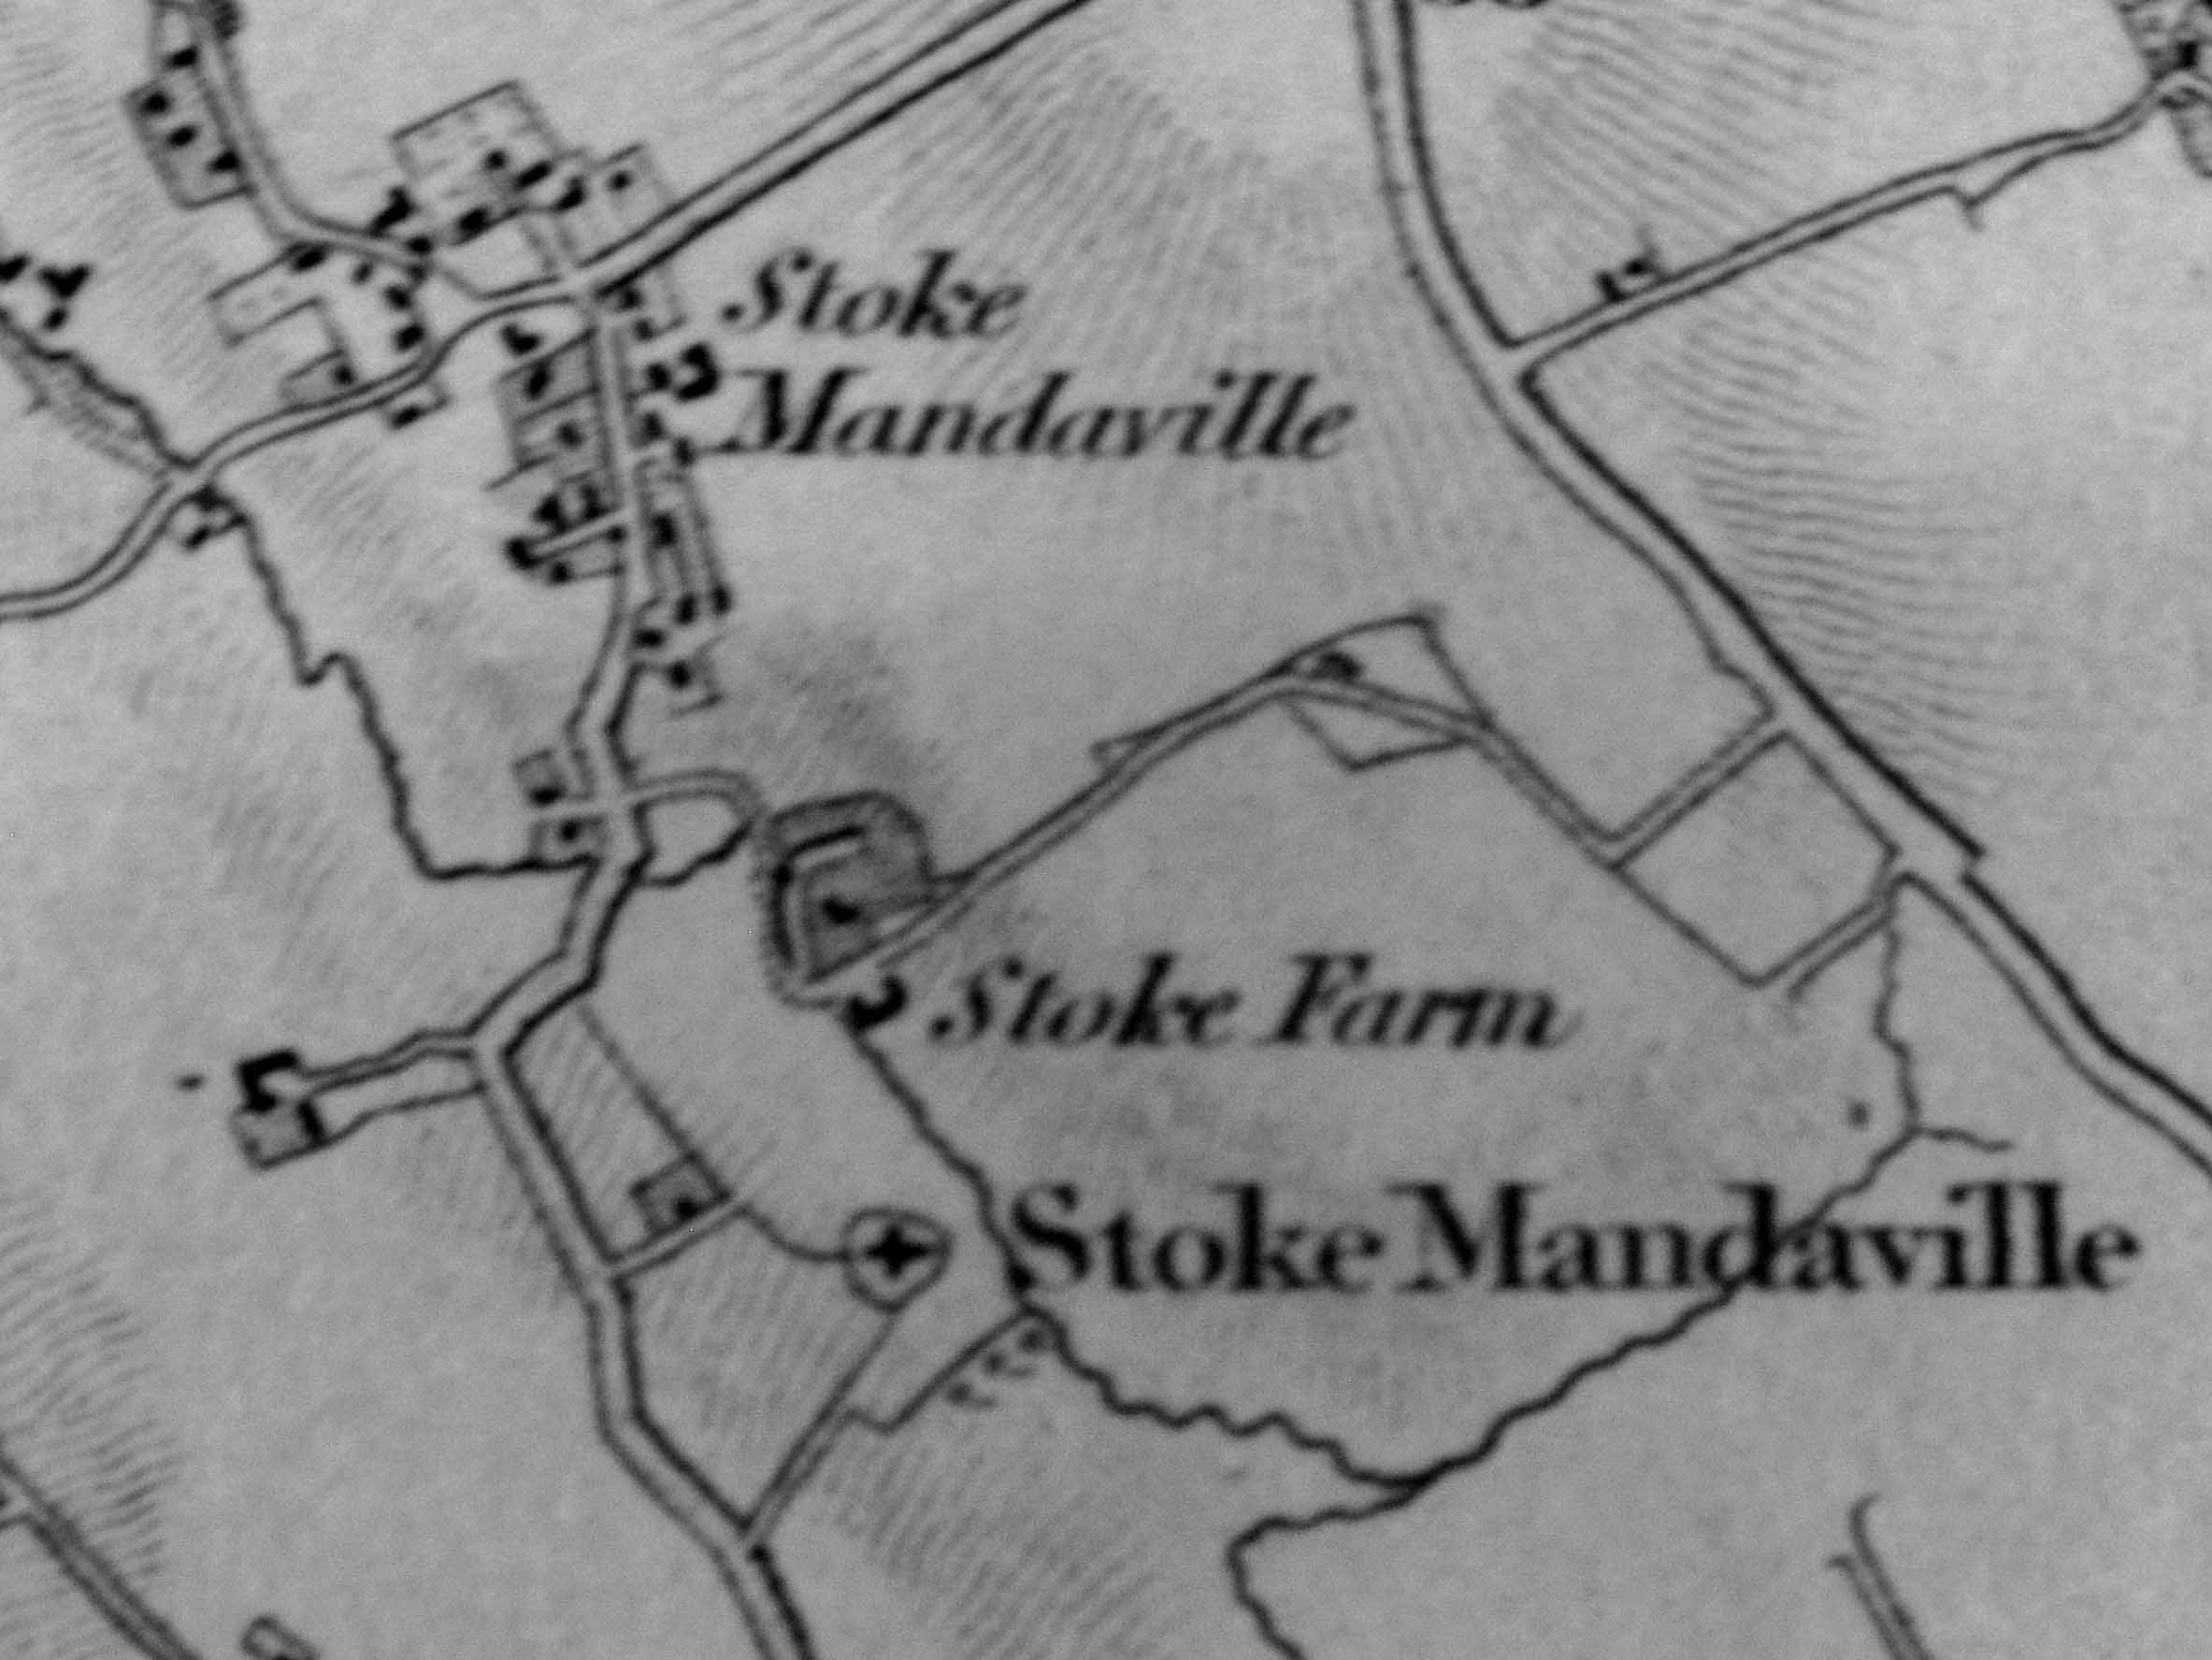 Stoke Mandeville's old parish chuurch in the fields in 1830